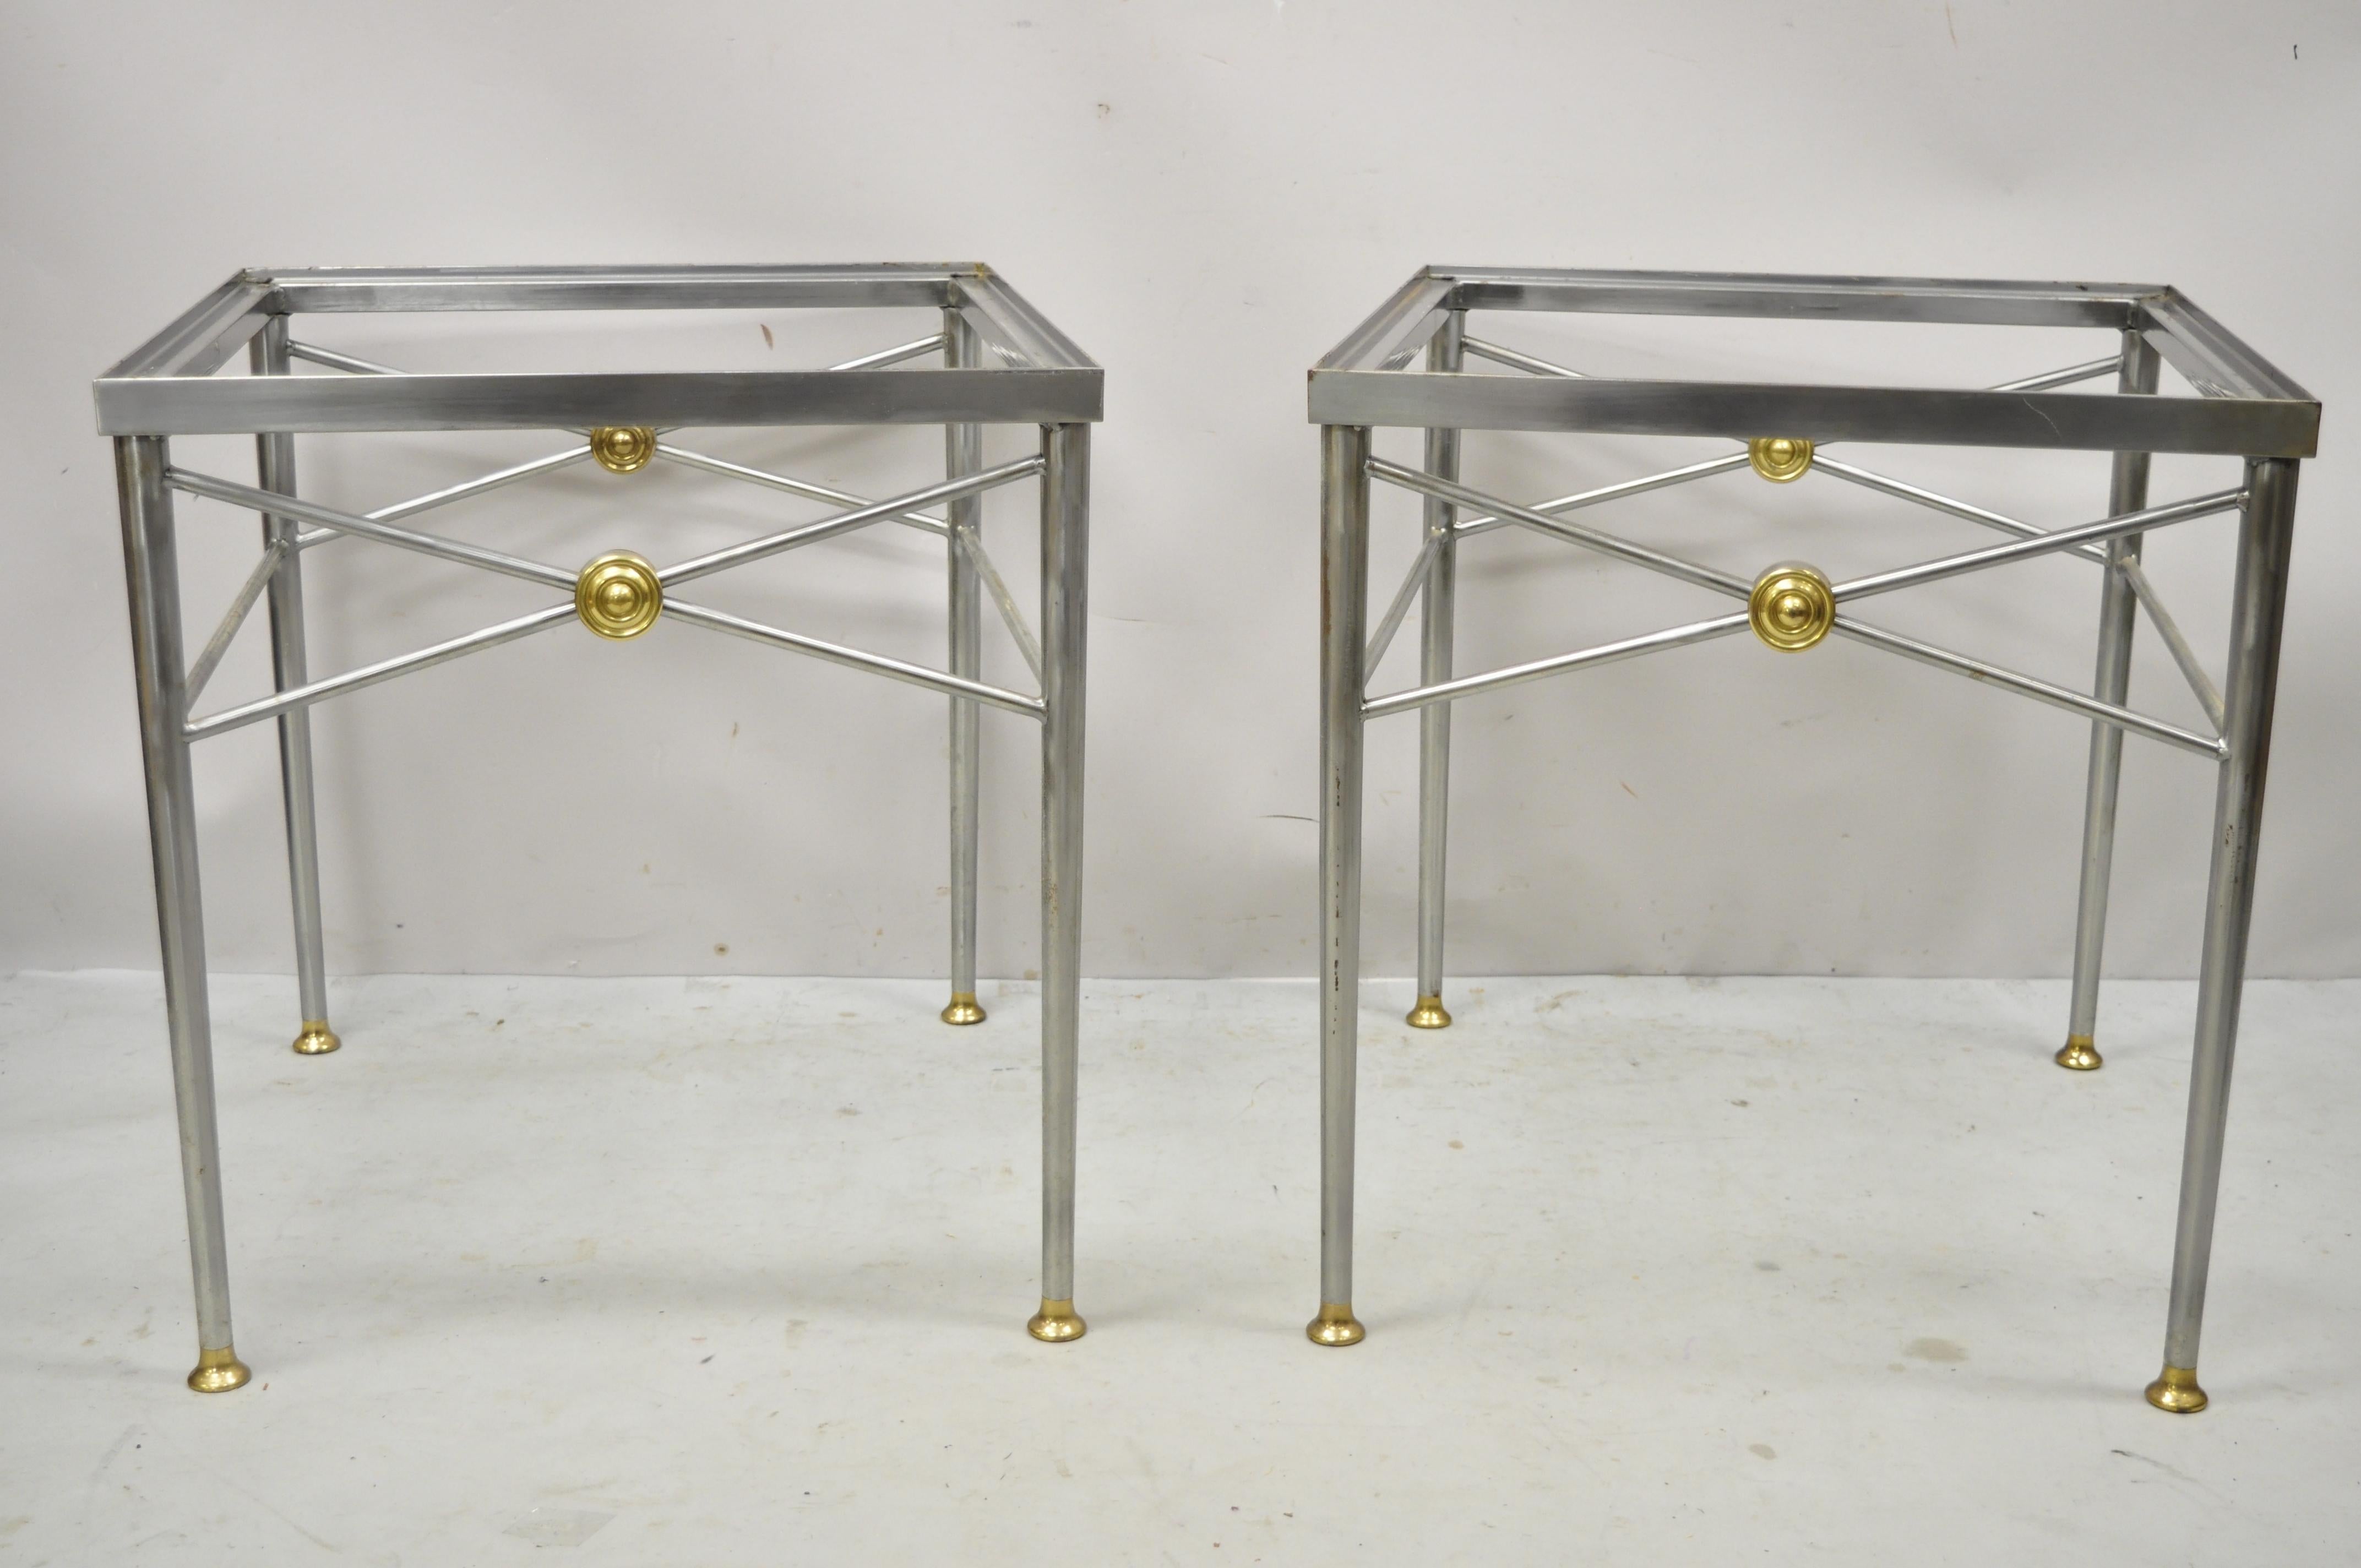 Regency Italian Directoire Maison Jansen Style Brushed Steel & Brass End Tables, a Pair For Sale